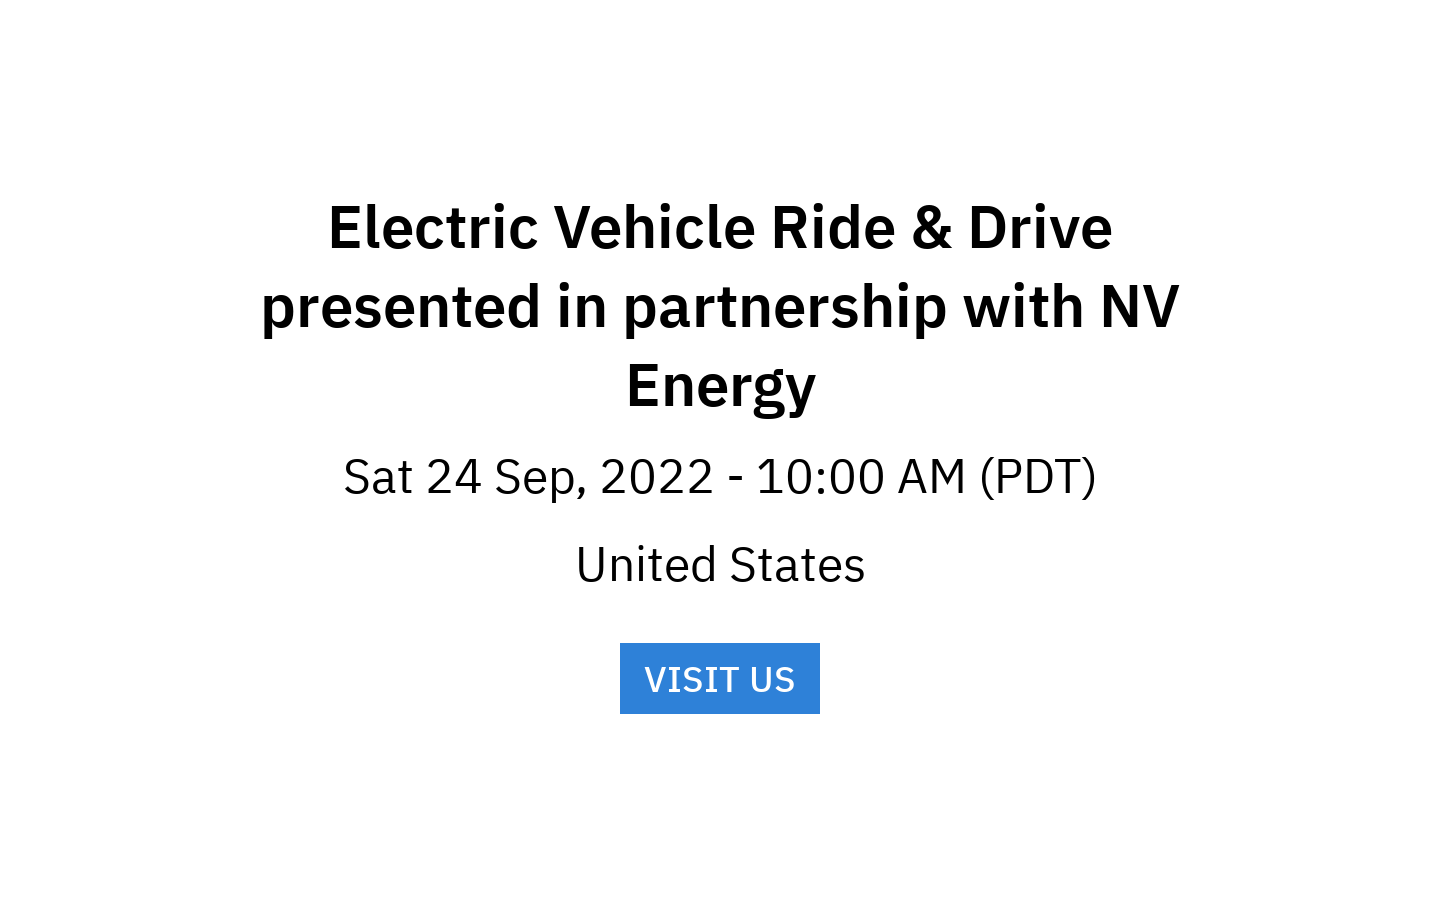 Electric Vehicle Ride & Drive presented in partnership with NV Energy